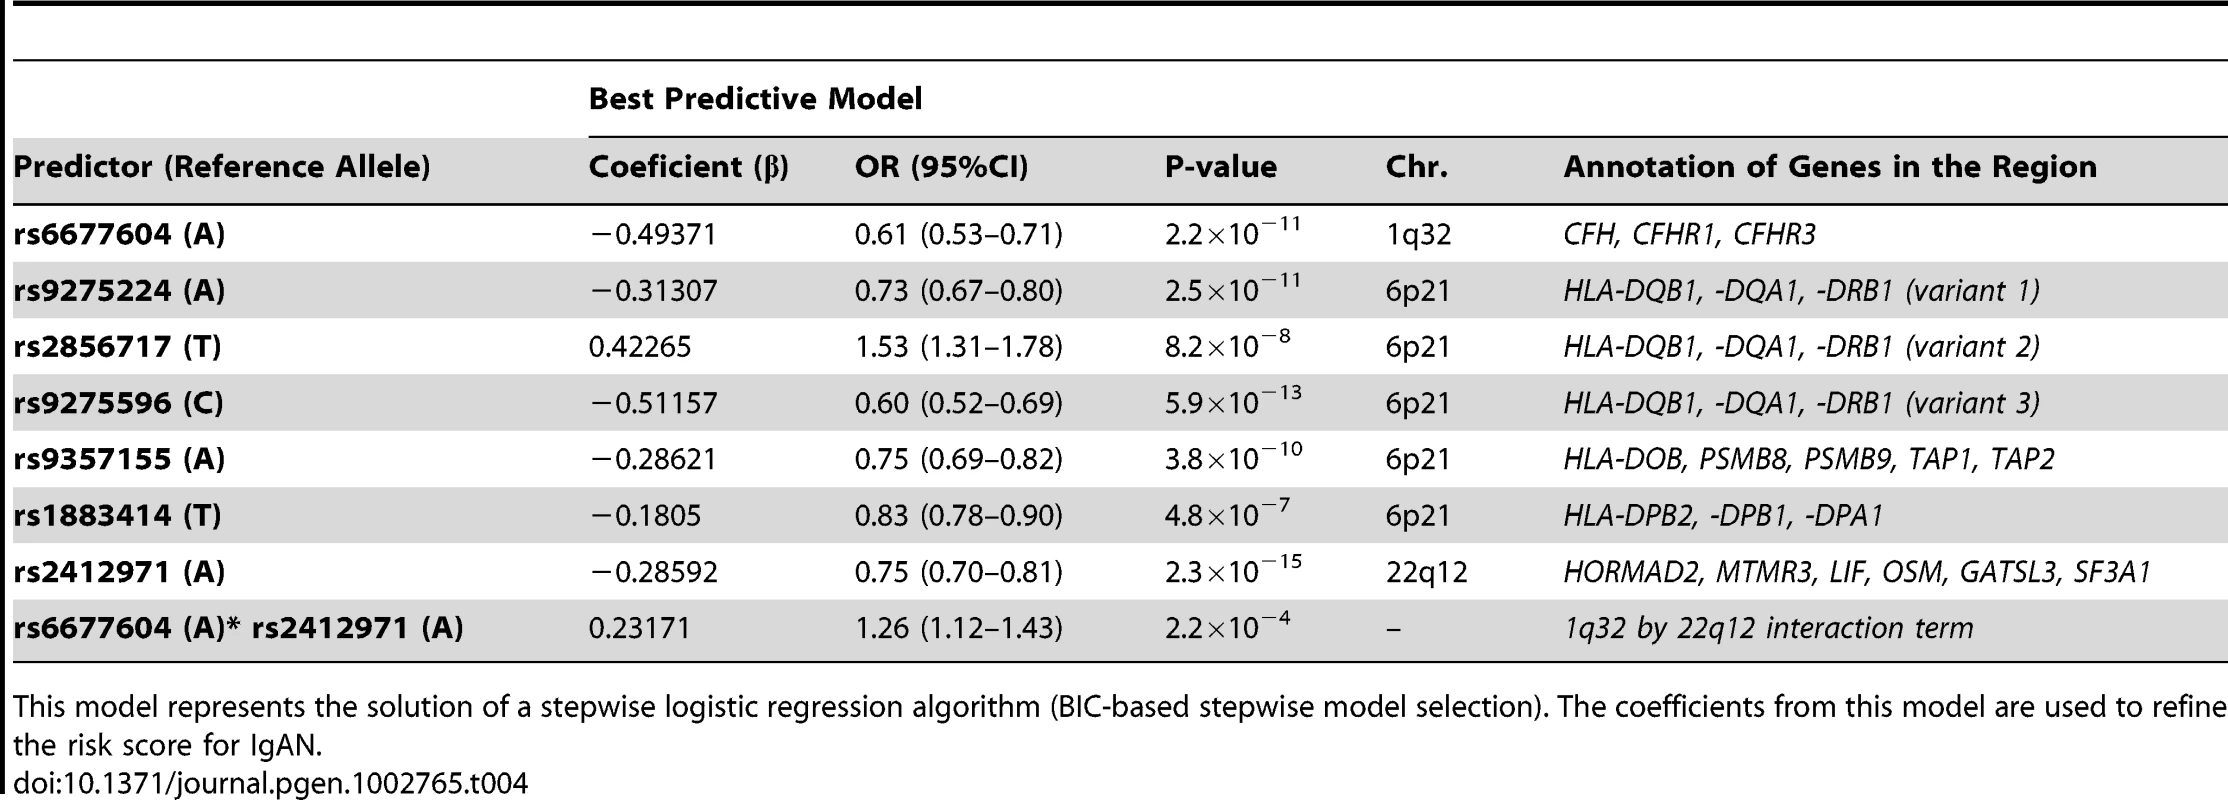 The best predictive model for IgAN based on all the genotyped SNPs and their pairwise interaction terms.